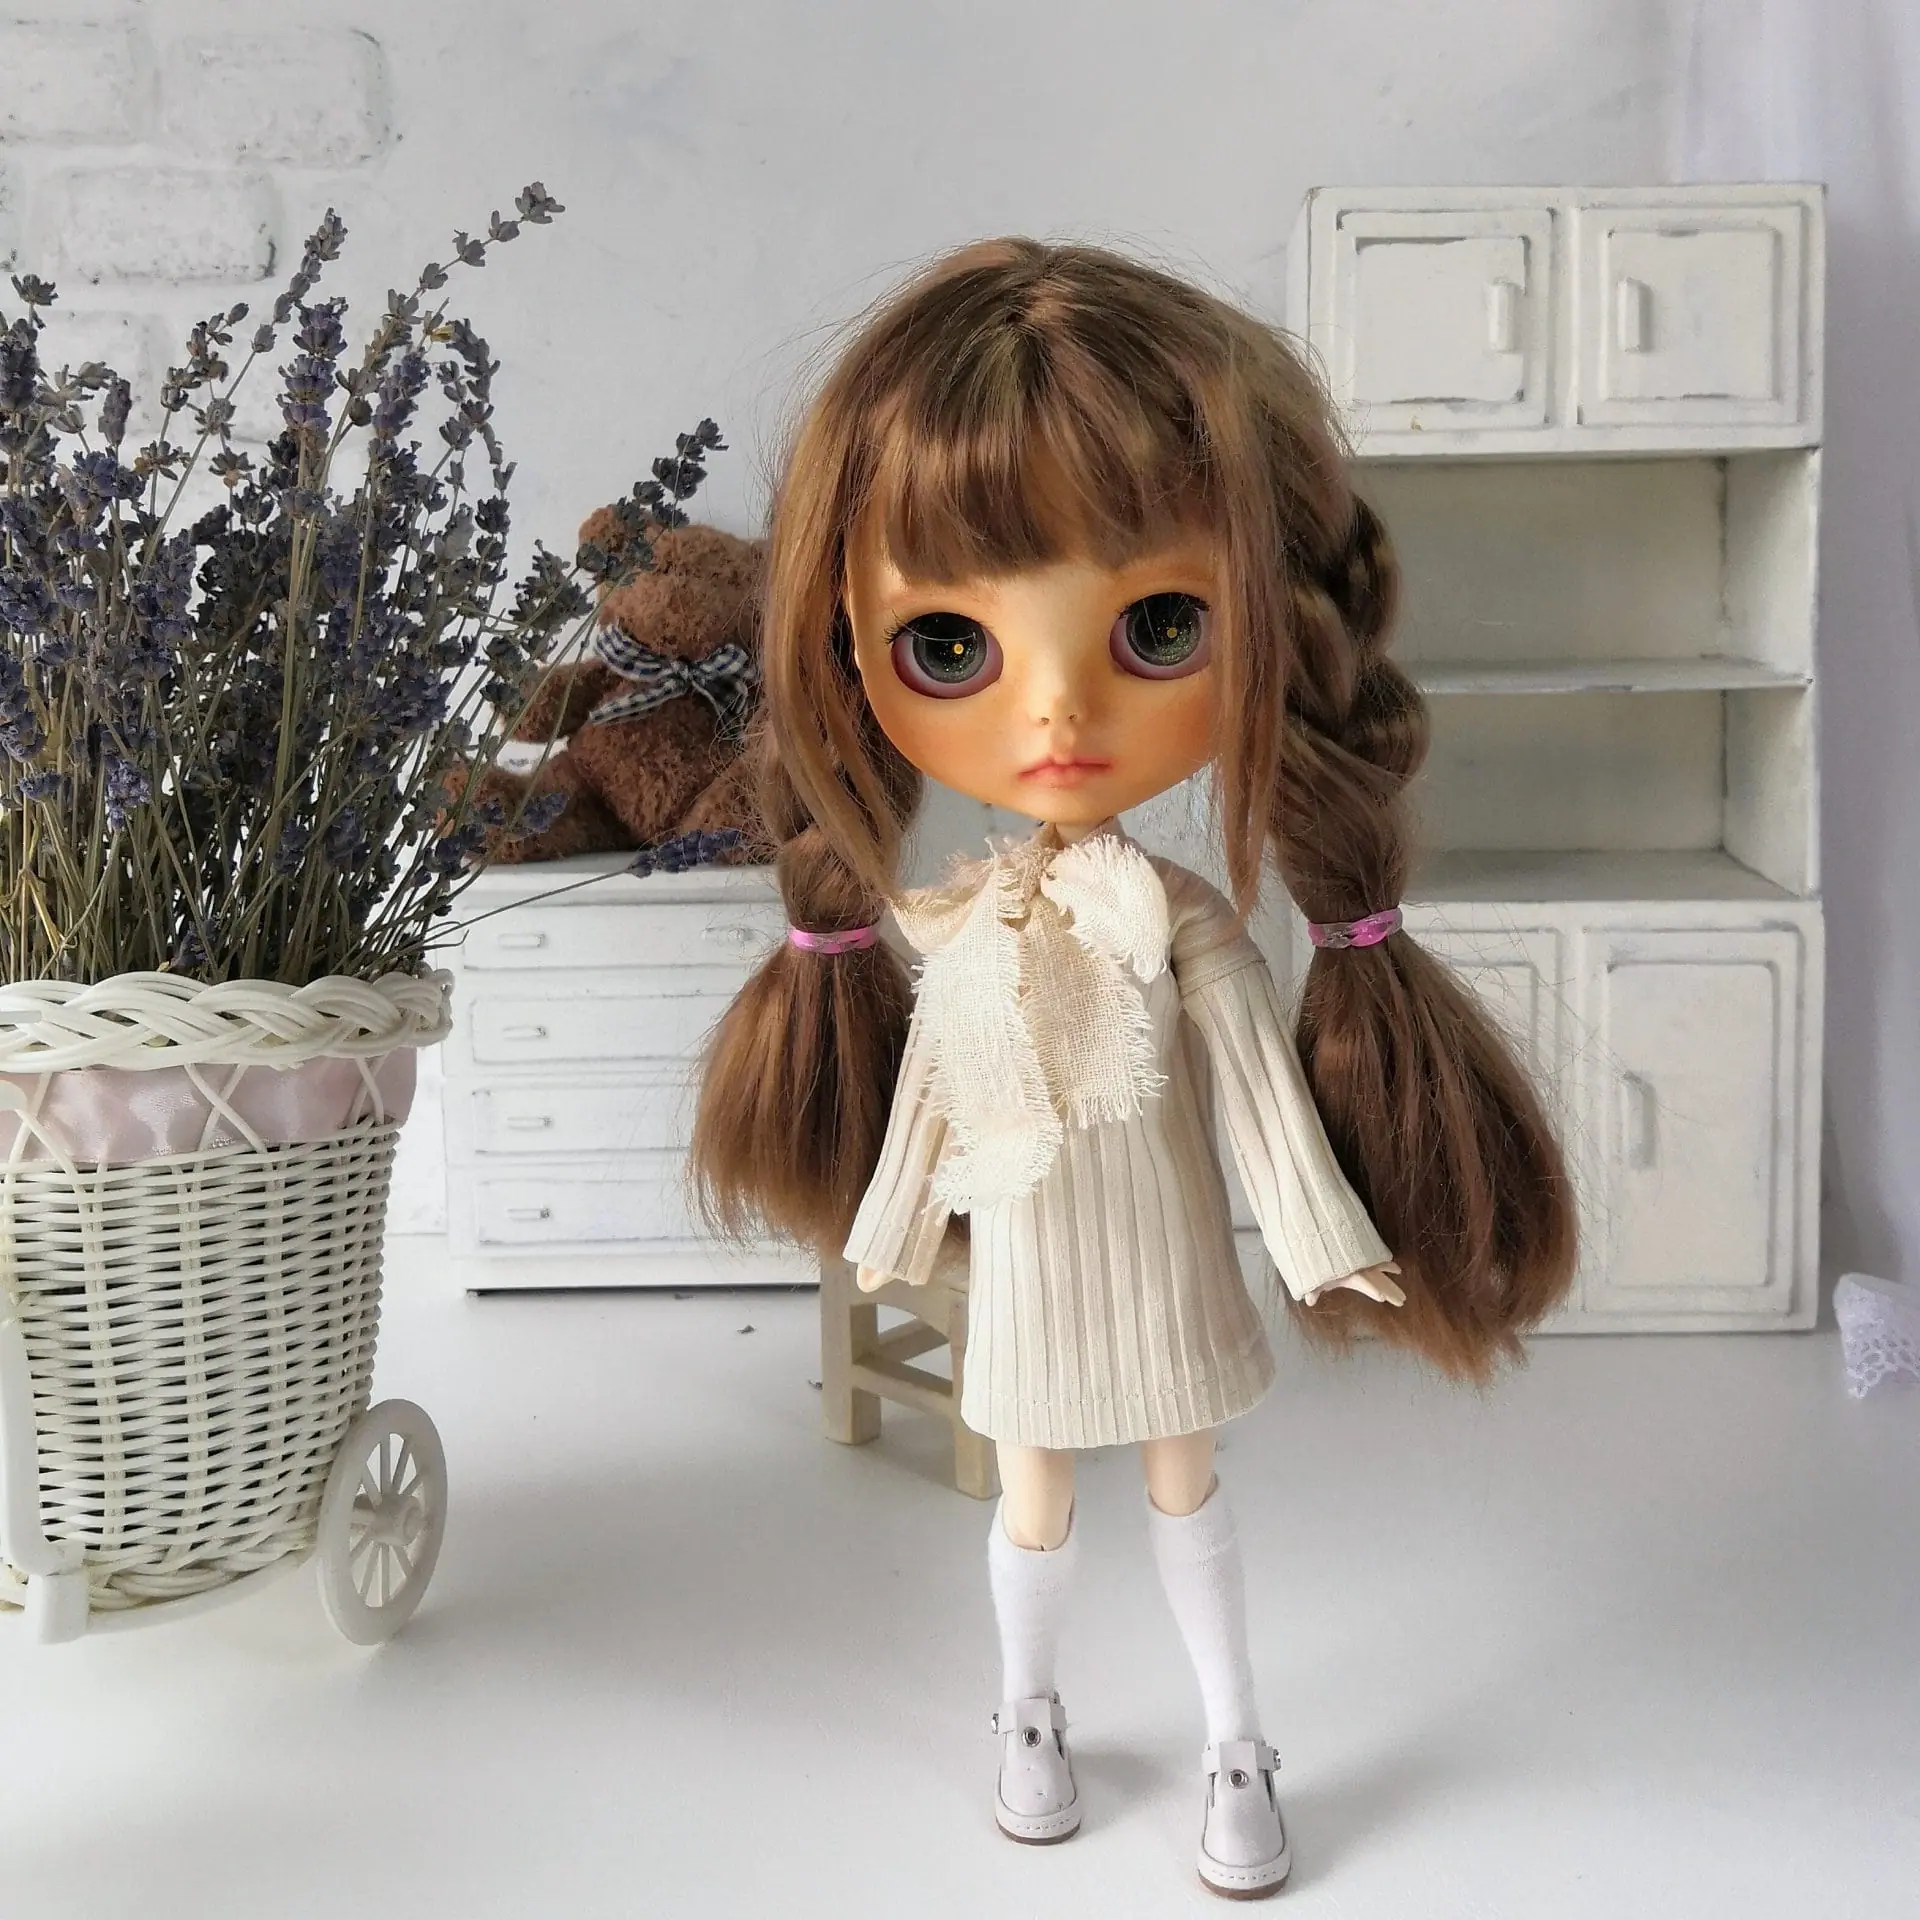 Loose-fitting beige dress for Blythe doll. Clothes doll